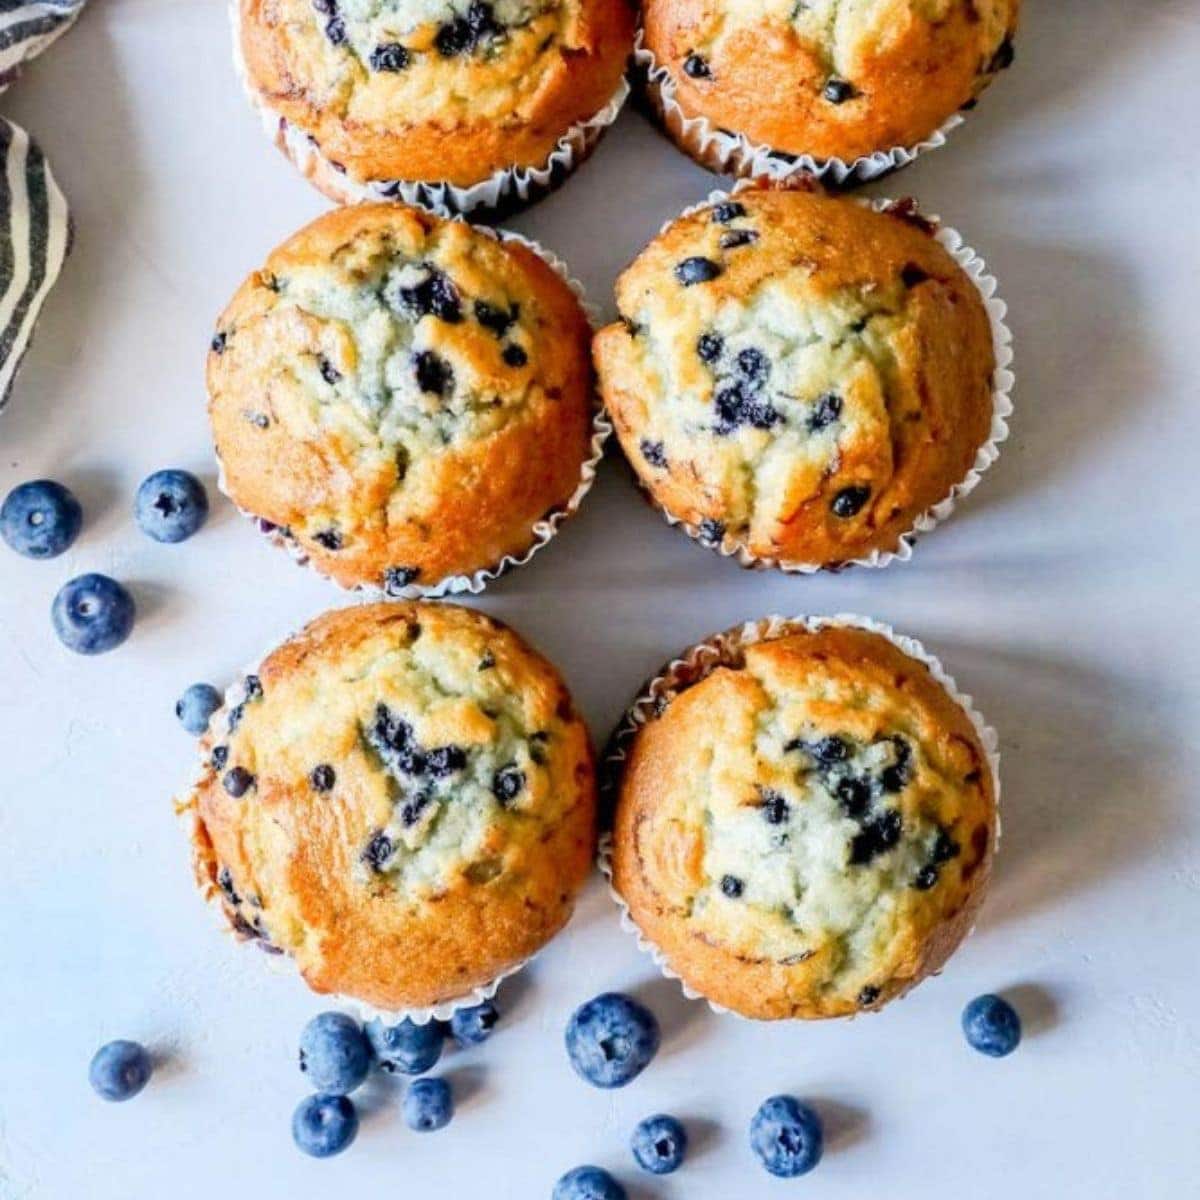 https://sweetcsdesigns.com/wp-content/uploads/2020/05/blueberry-muffins-Recipe-Picture.jpg